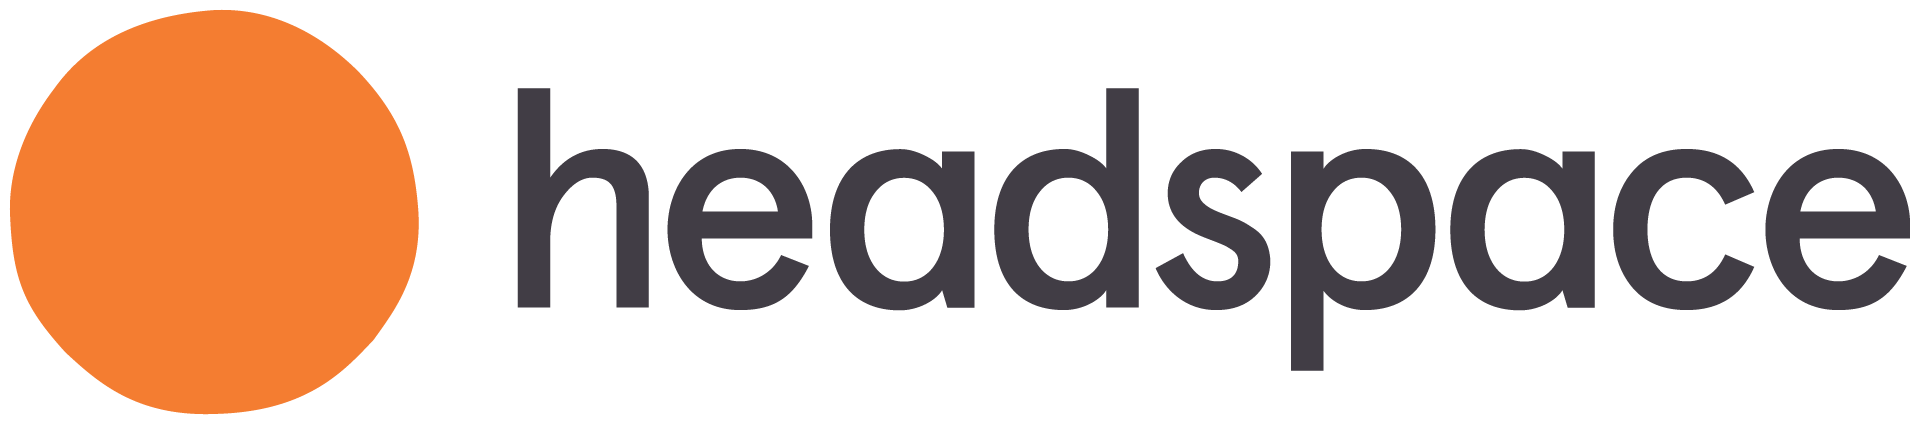 headspace_logo_primary